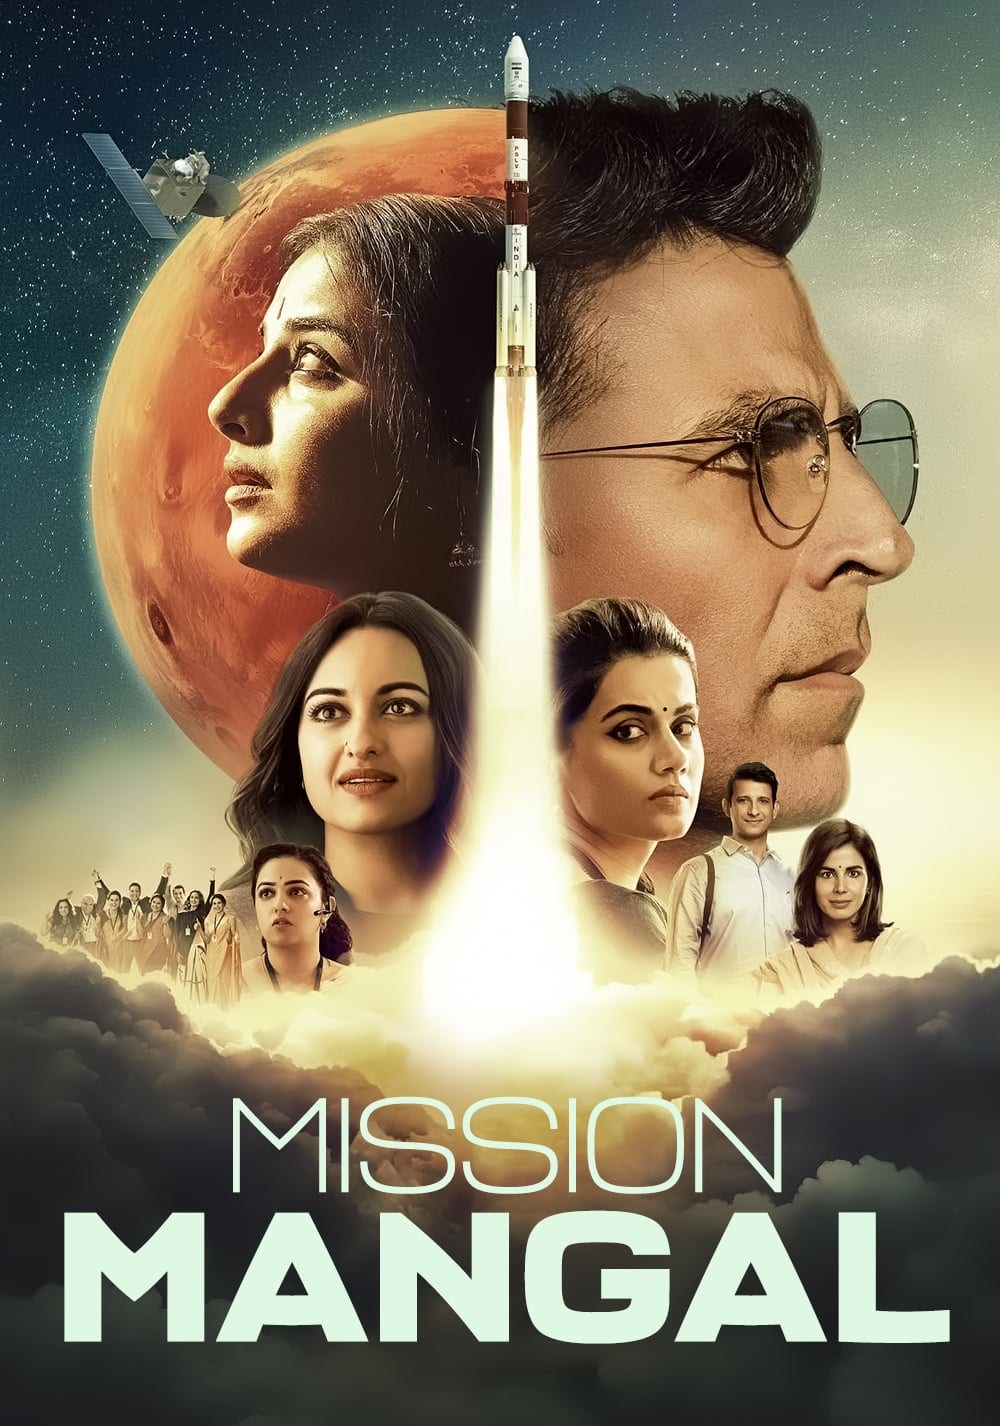 Poster for the movie "Mission Mangal"